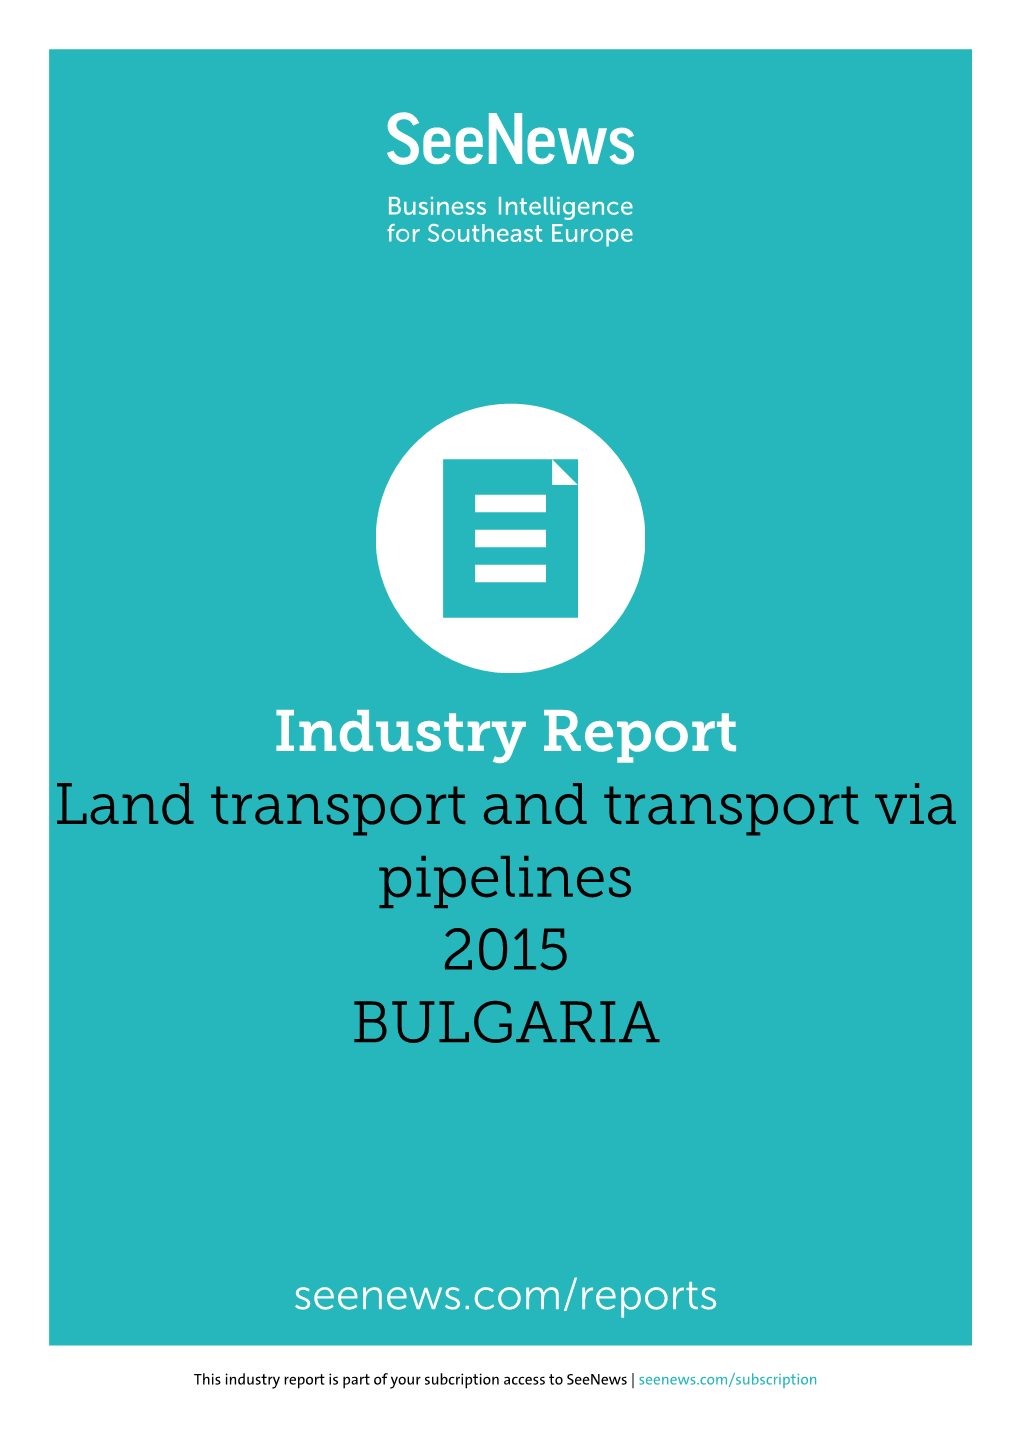 Industry Report Land Transport and Transport Via Pipelines 2015 BULGARIA